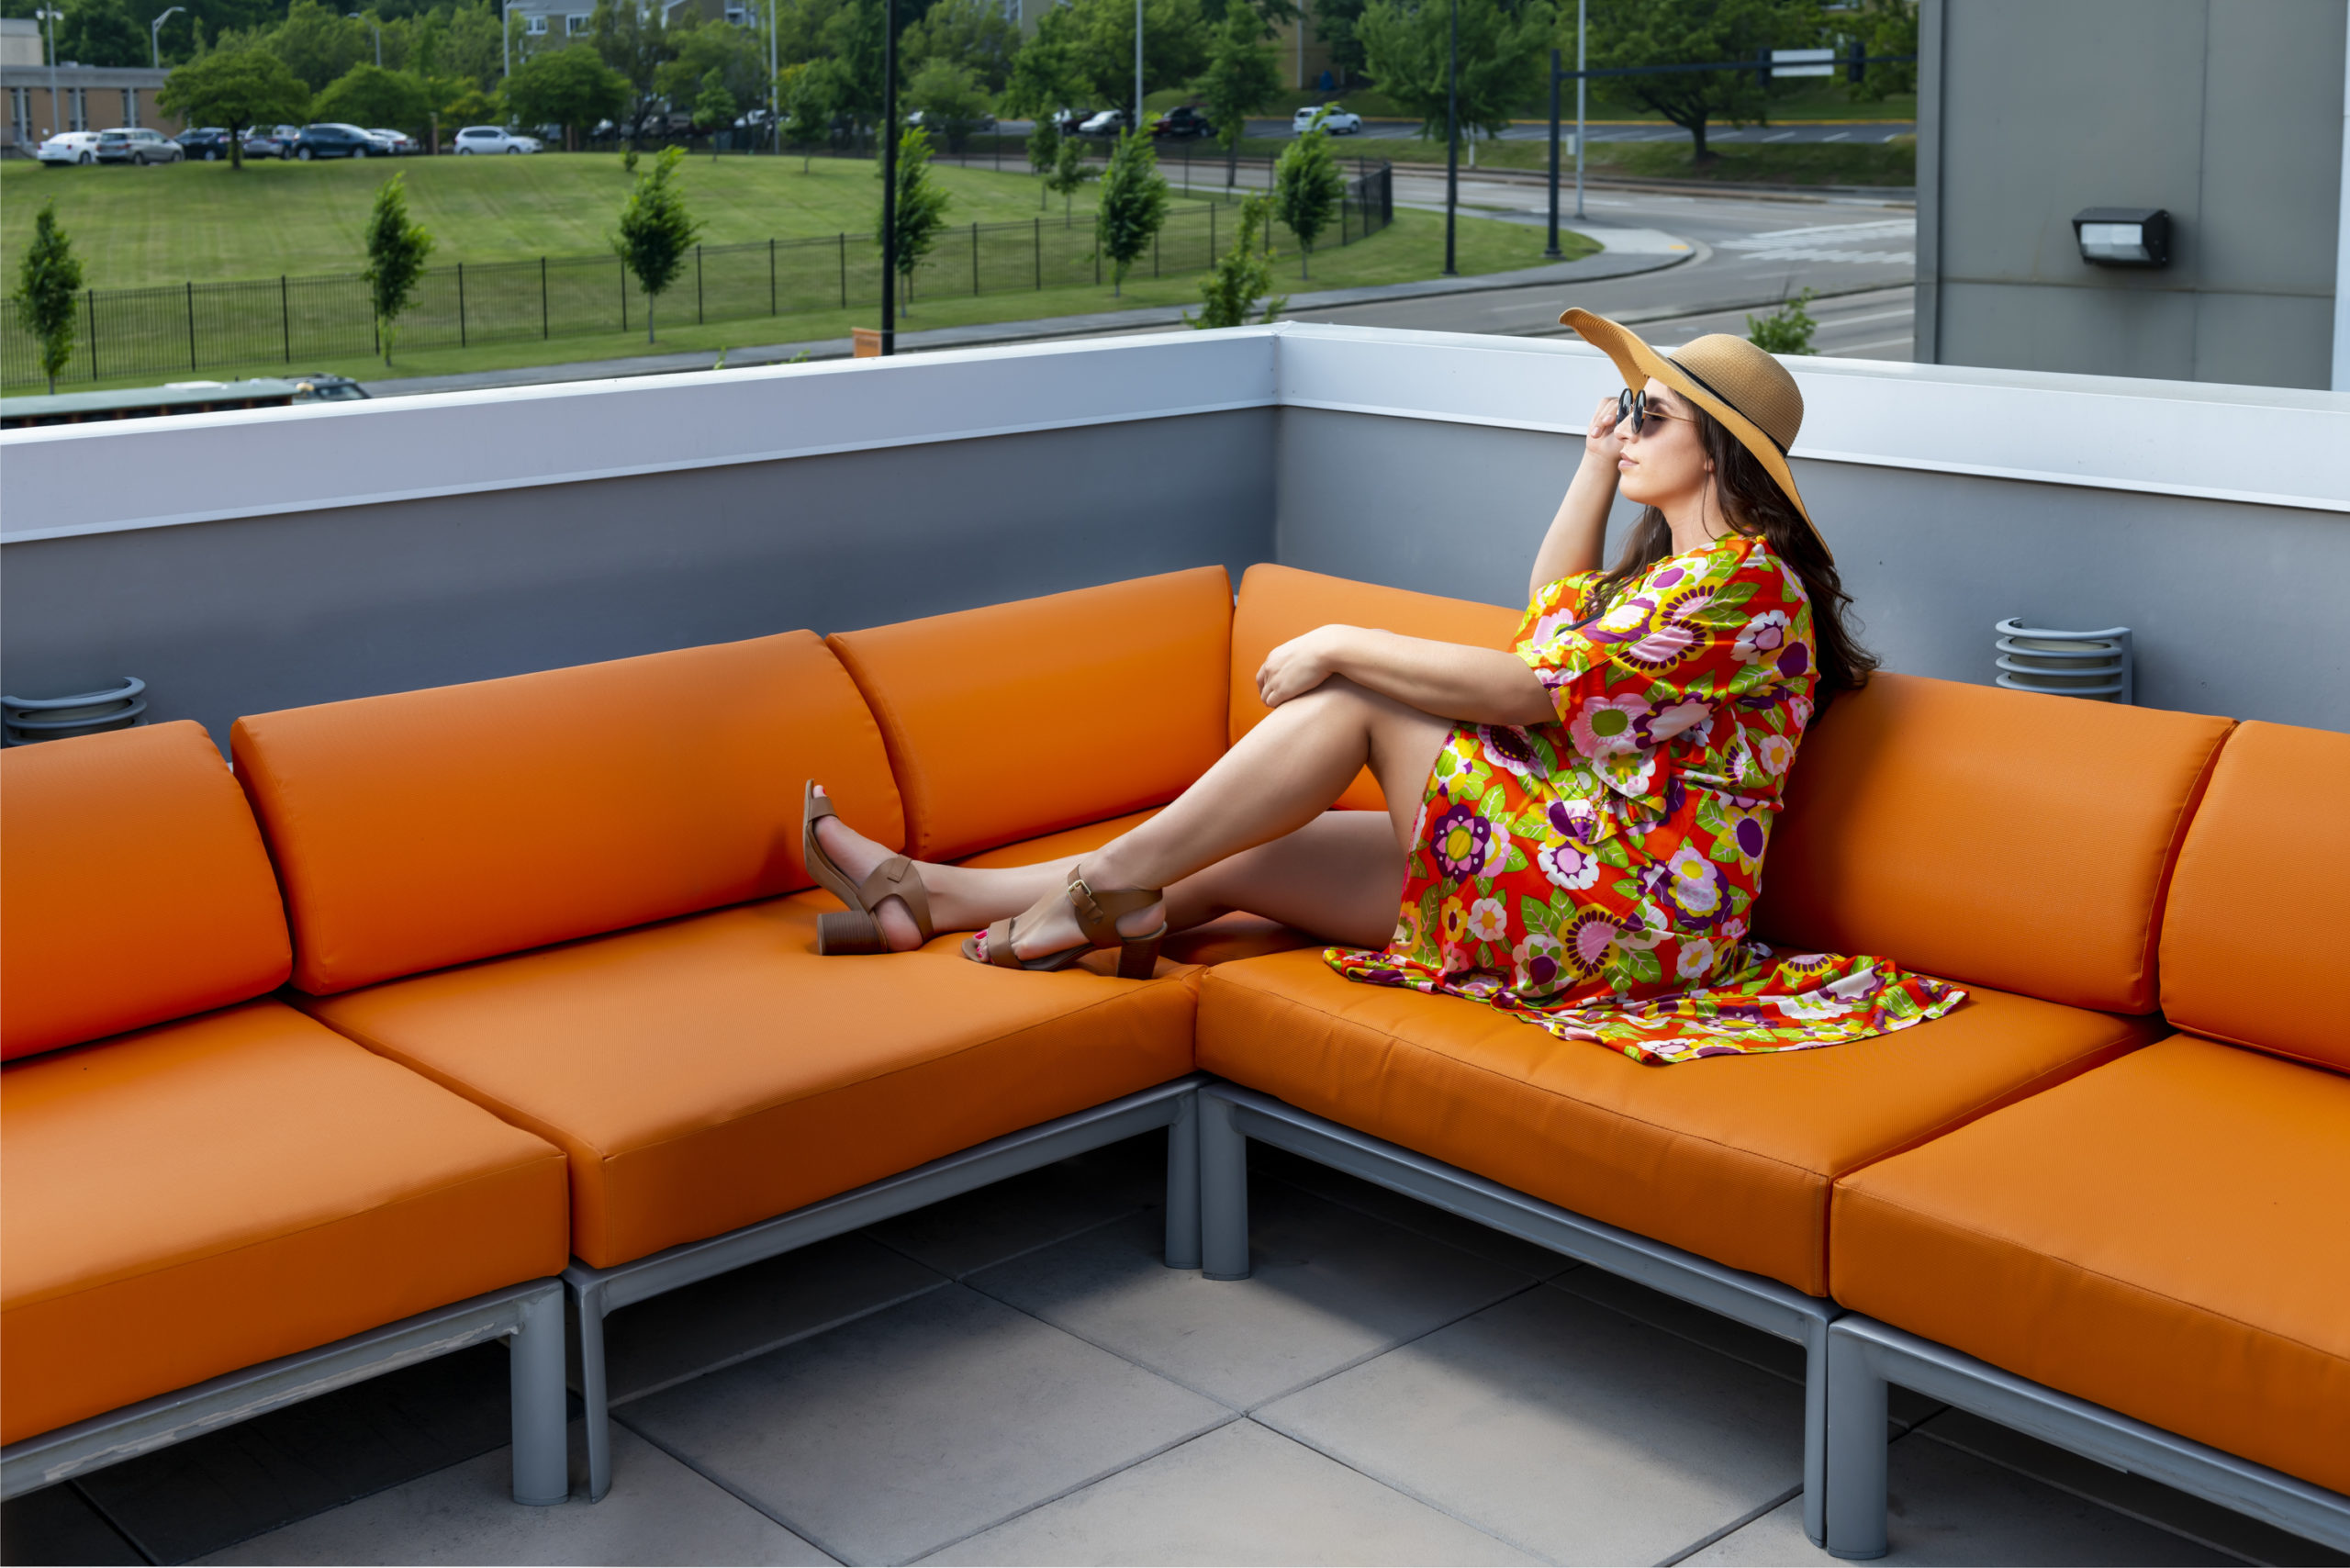 girl on orange couch outdoors at evolve community